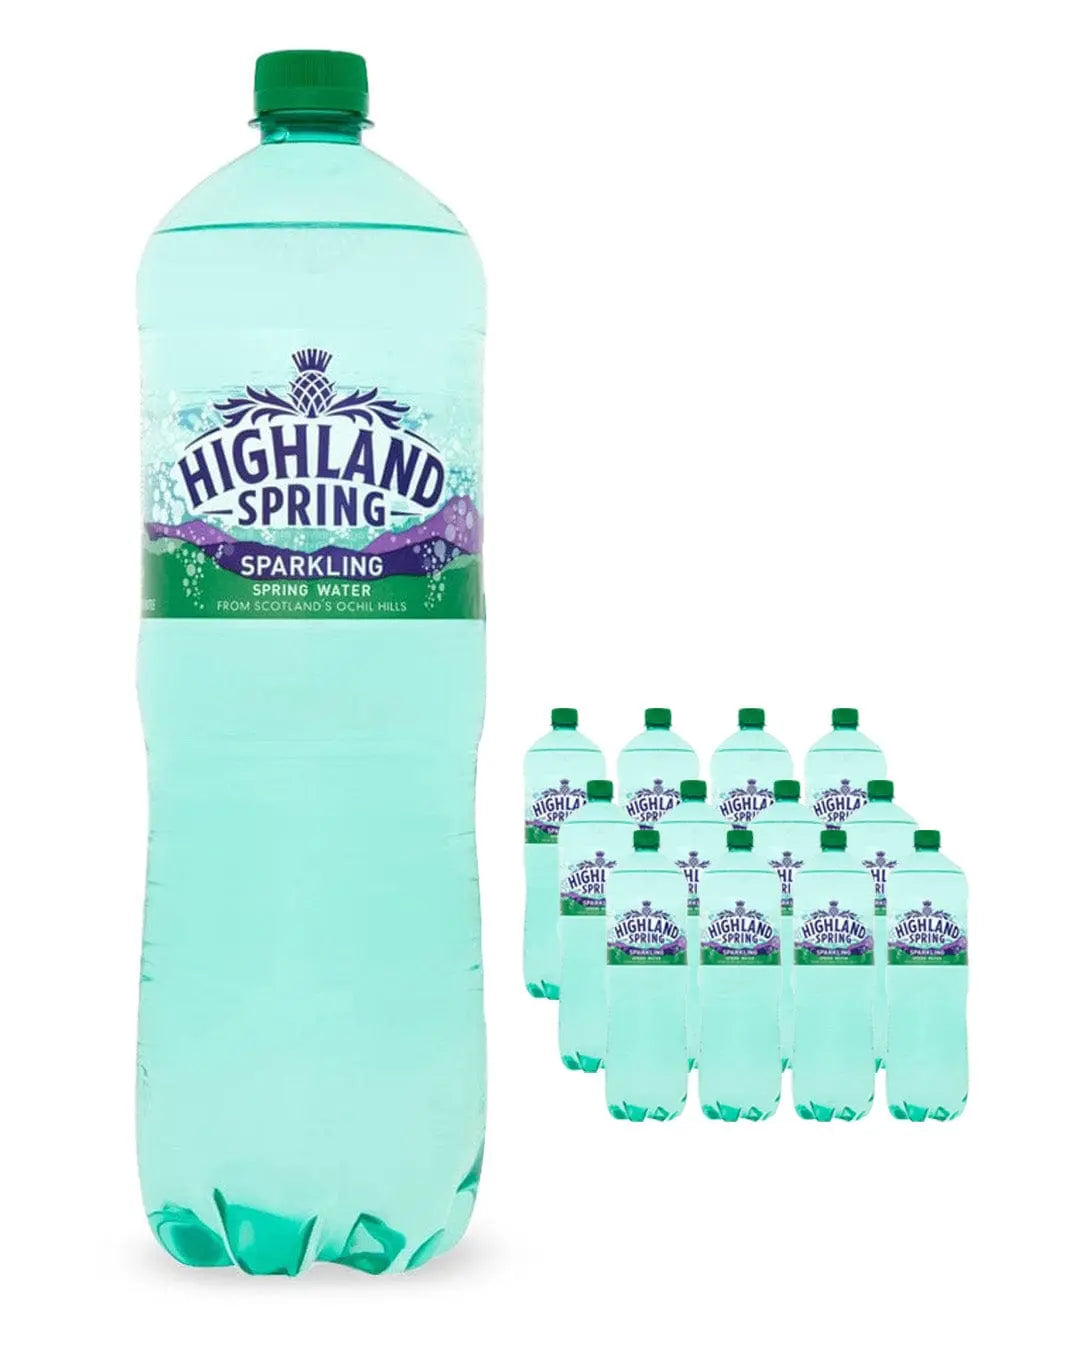 Highland Spring Still Mineral Water Multipack, 12 x 1.5 L – The Bottle Club